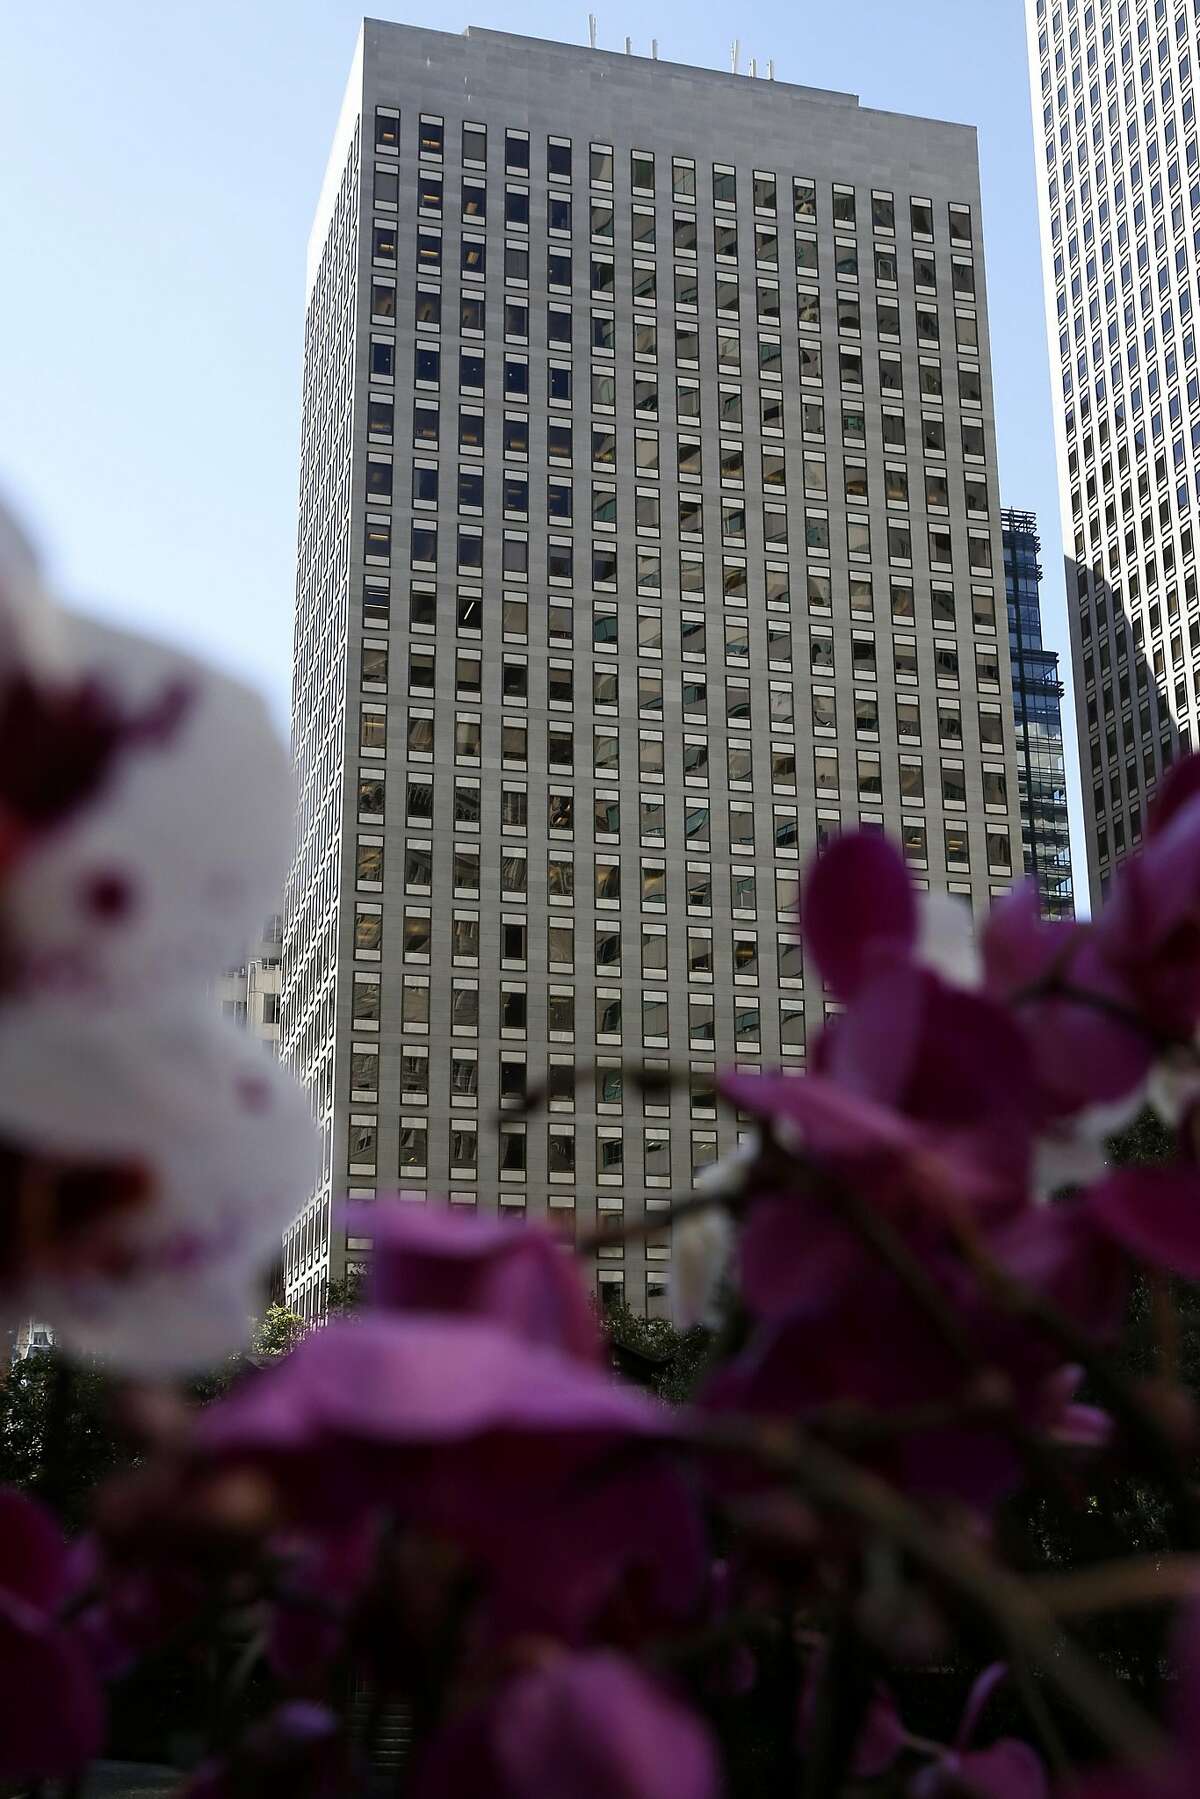 A building rises out of orchids at Elizabeth's Flowers in downtown San Francisco, California, on Thursday, July 21, 2016.